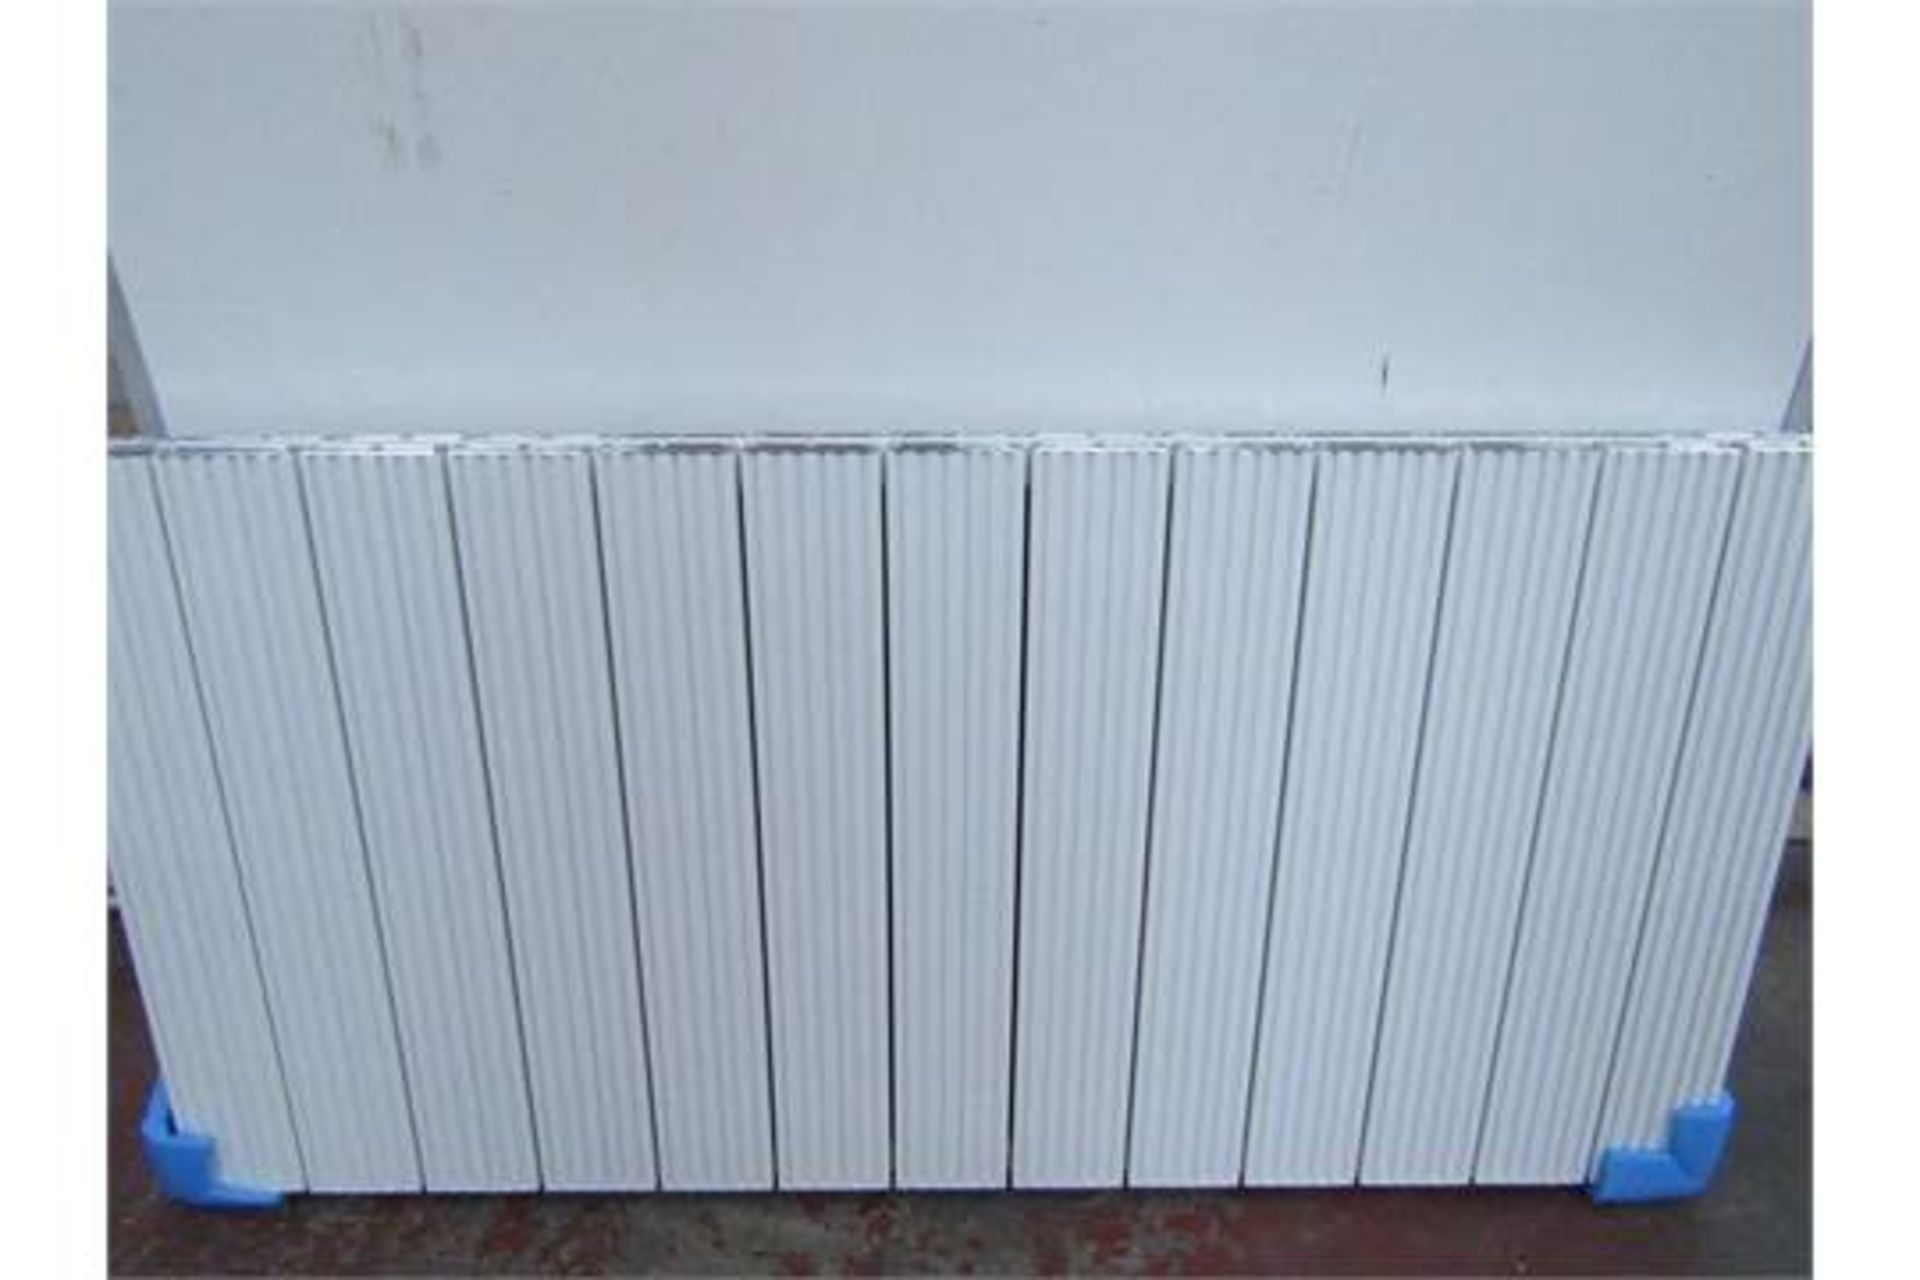 Carisa Nemo monza double radiator, horizontal, 1230mm x 600mm, white colour. Dented and boxed. - Image 3 of 3